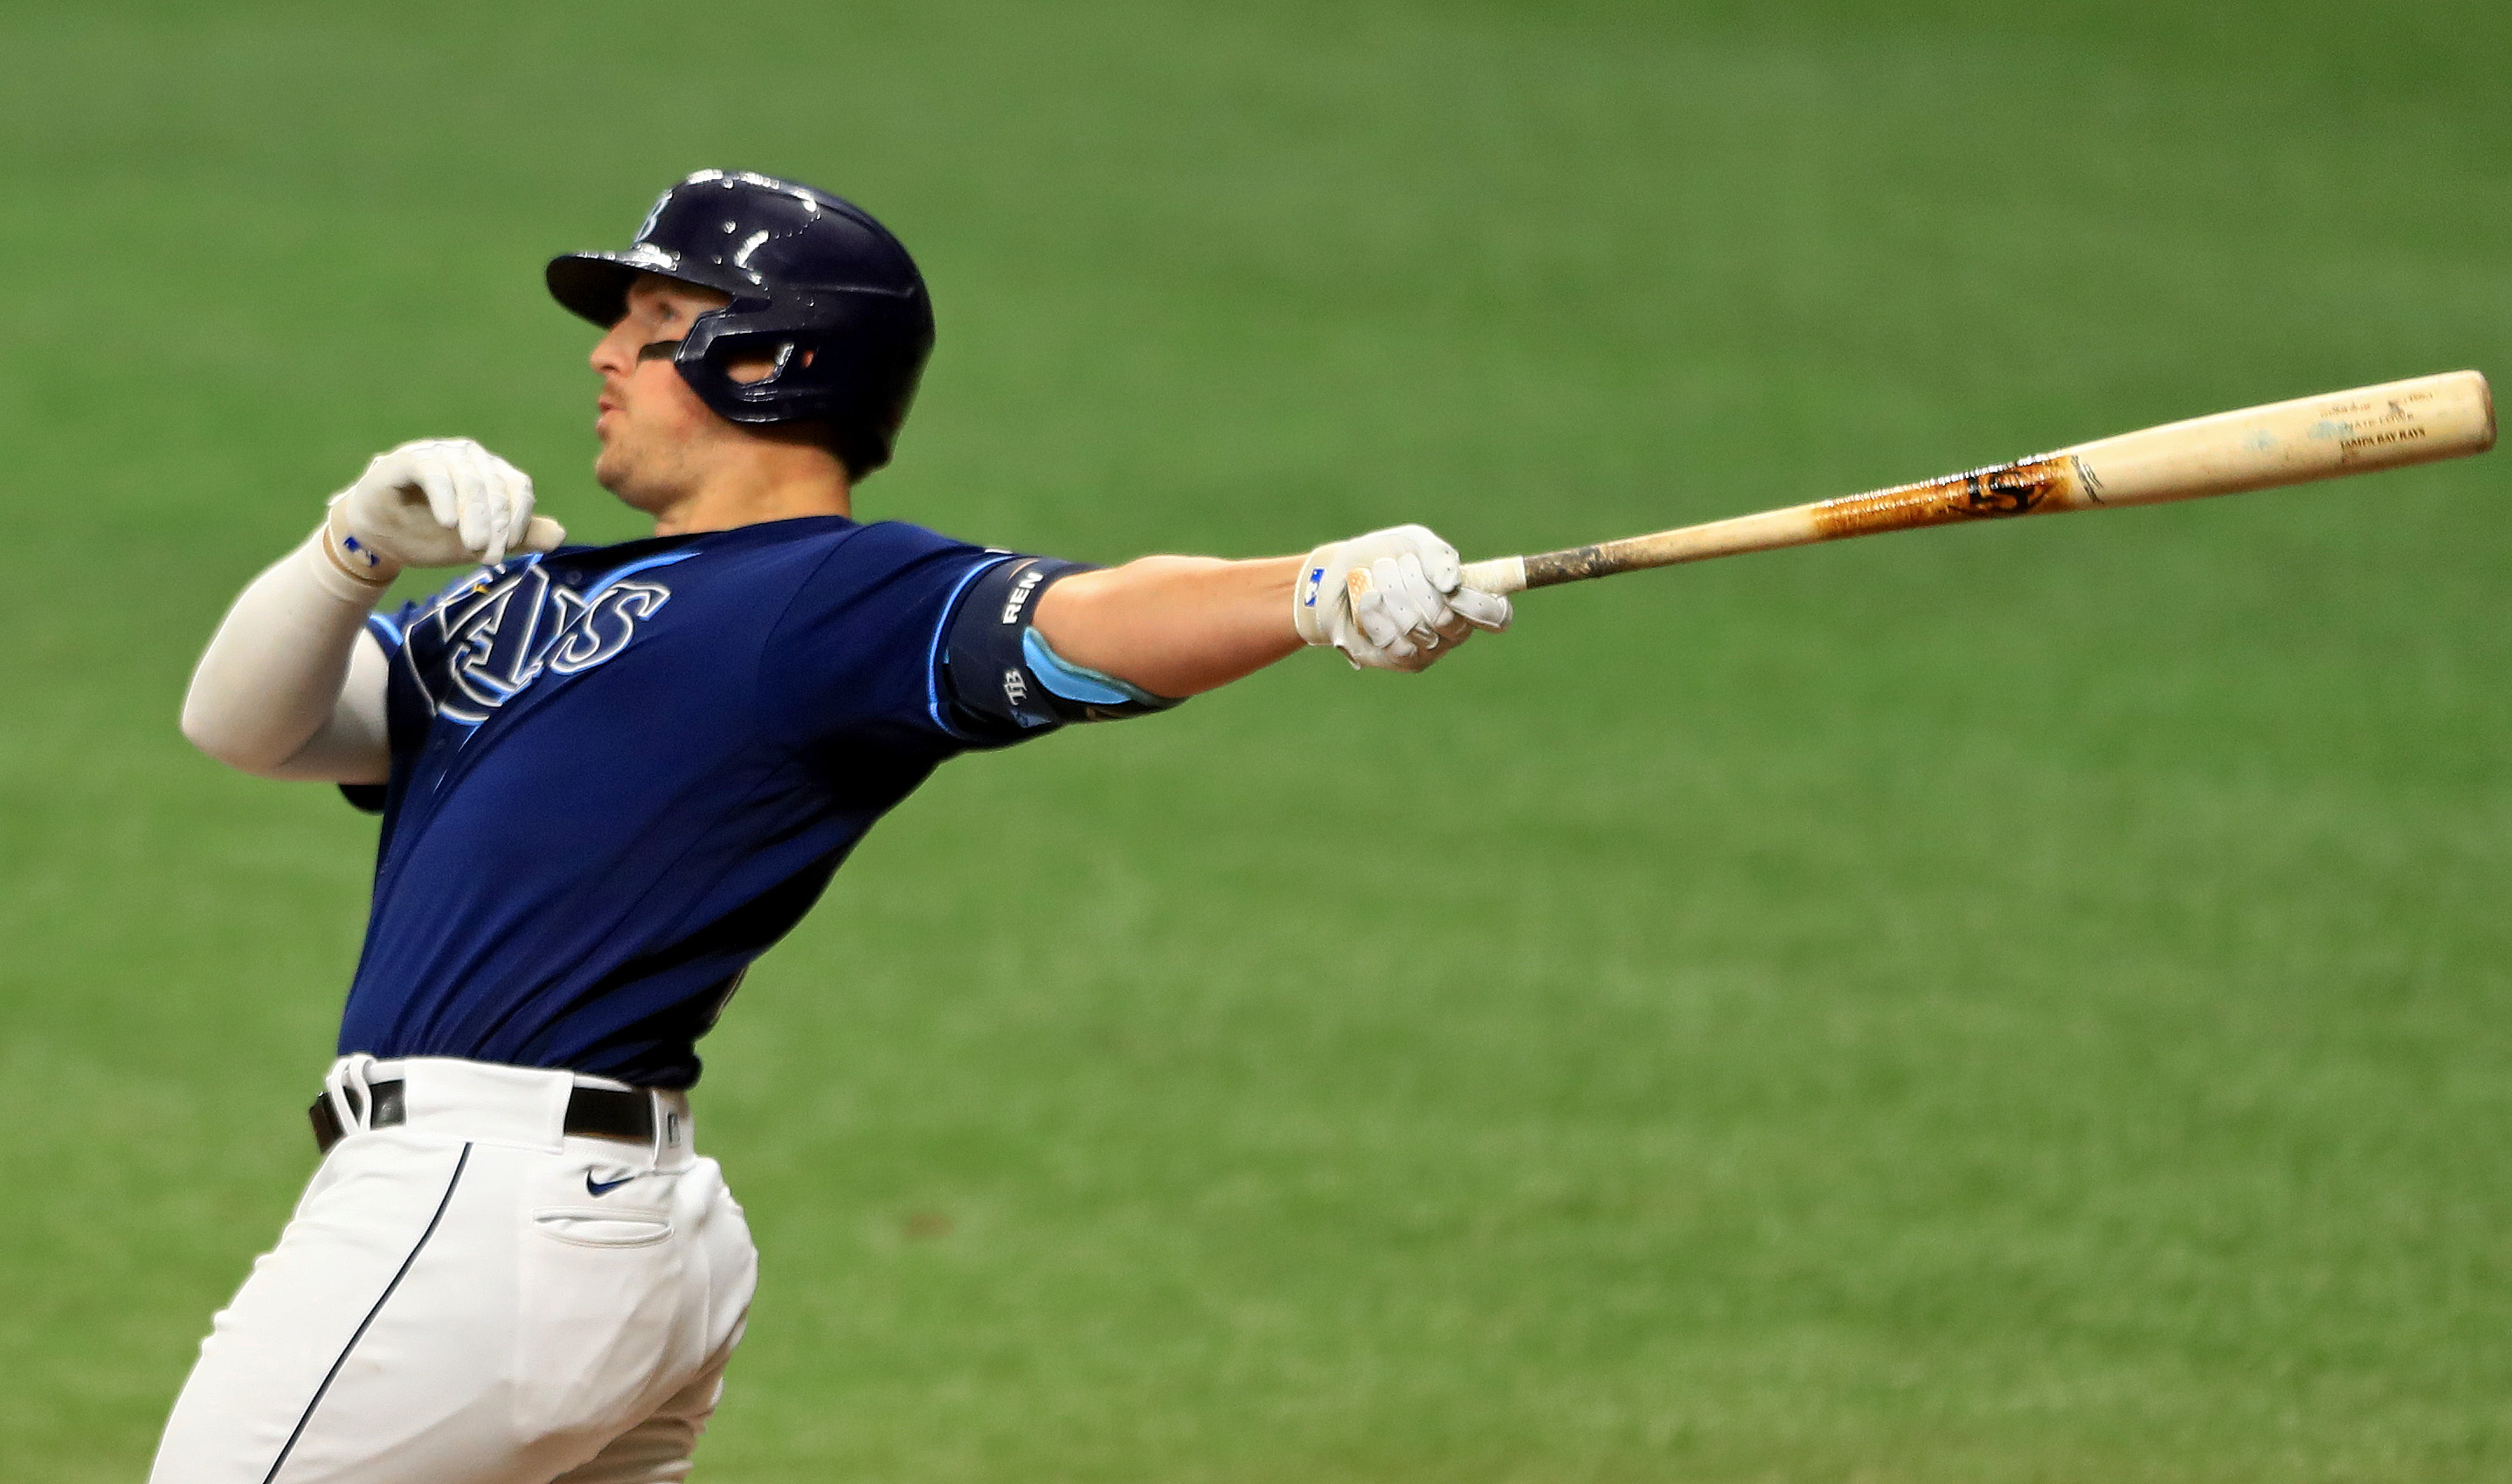 Four things to know about Hunter Renfroe, the newest Red Sox